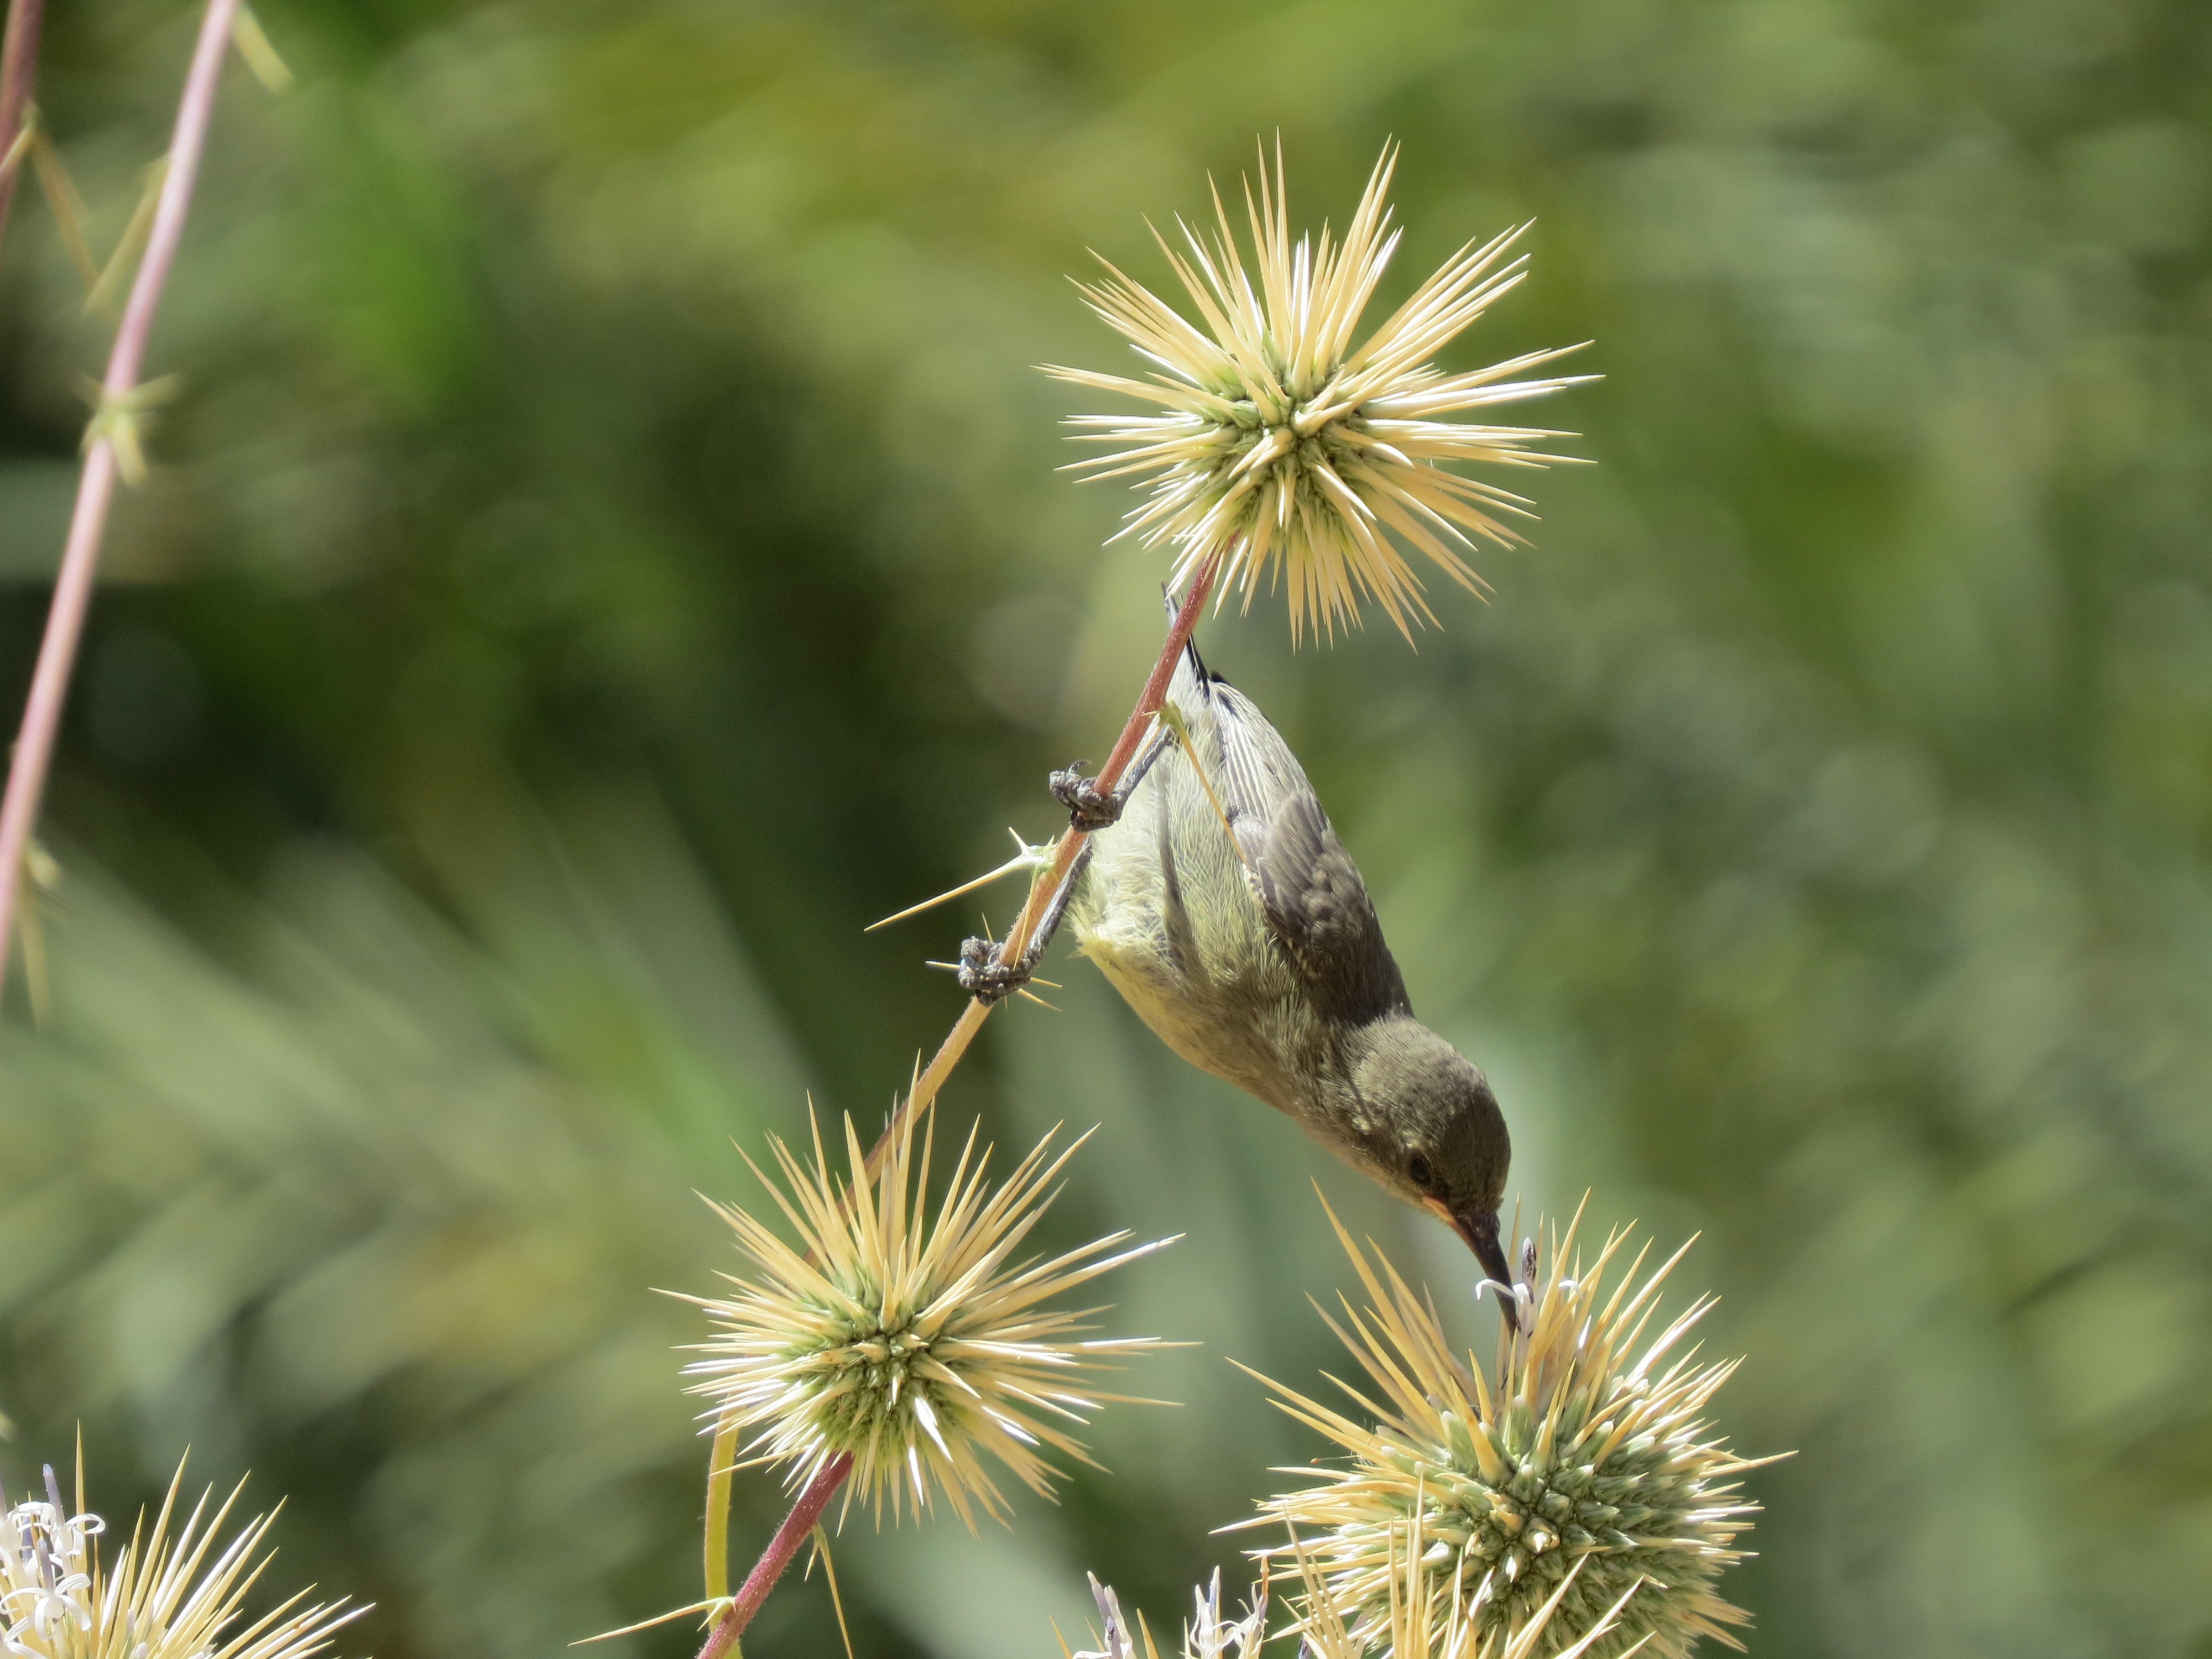 2015's overall winner, by Mohamed Shebl, “Palestinian sunbird female forages on Echinops sp.”